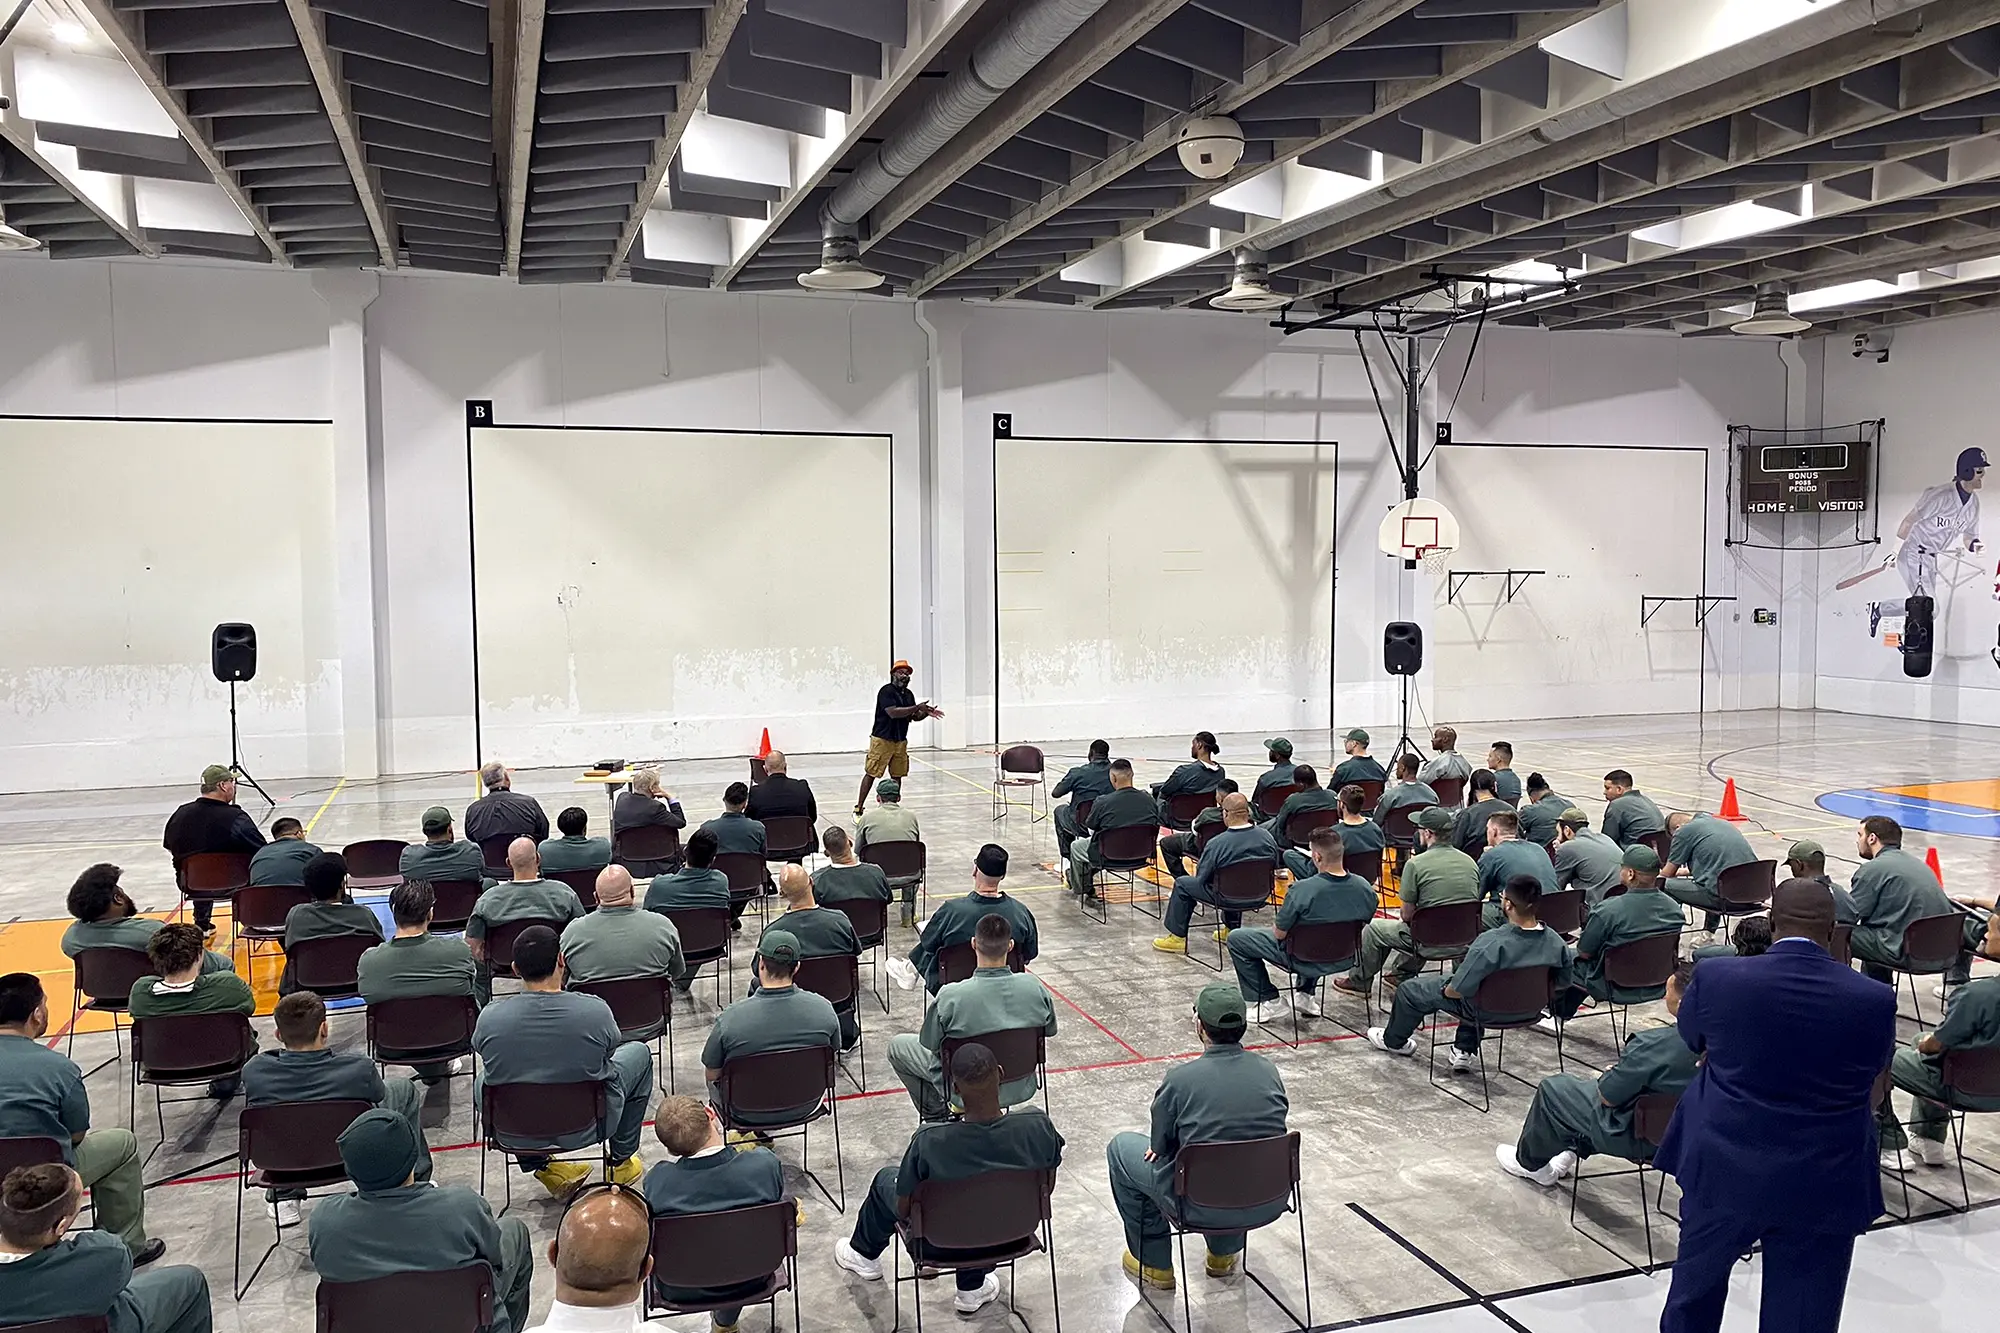 Reginald Dwayne Betts performs in a large gymnasium filled with seated men at Arkansas Valley Correctional Facility in Colorado.